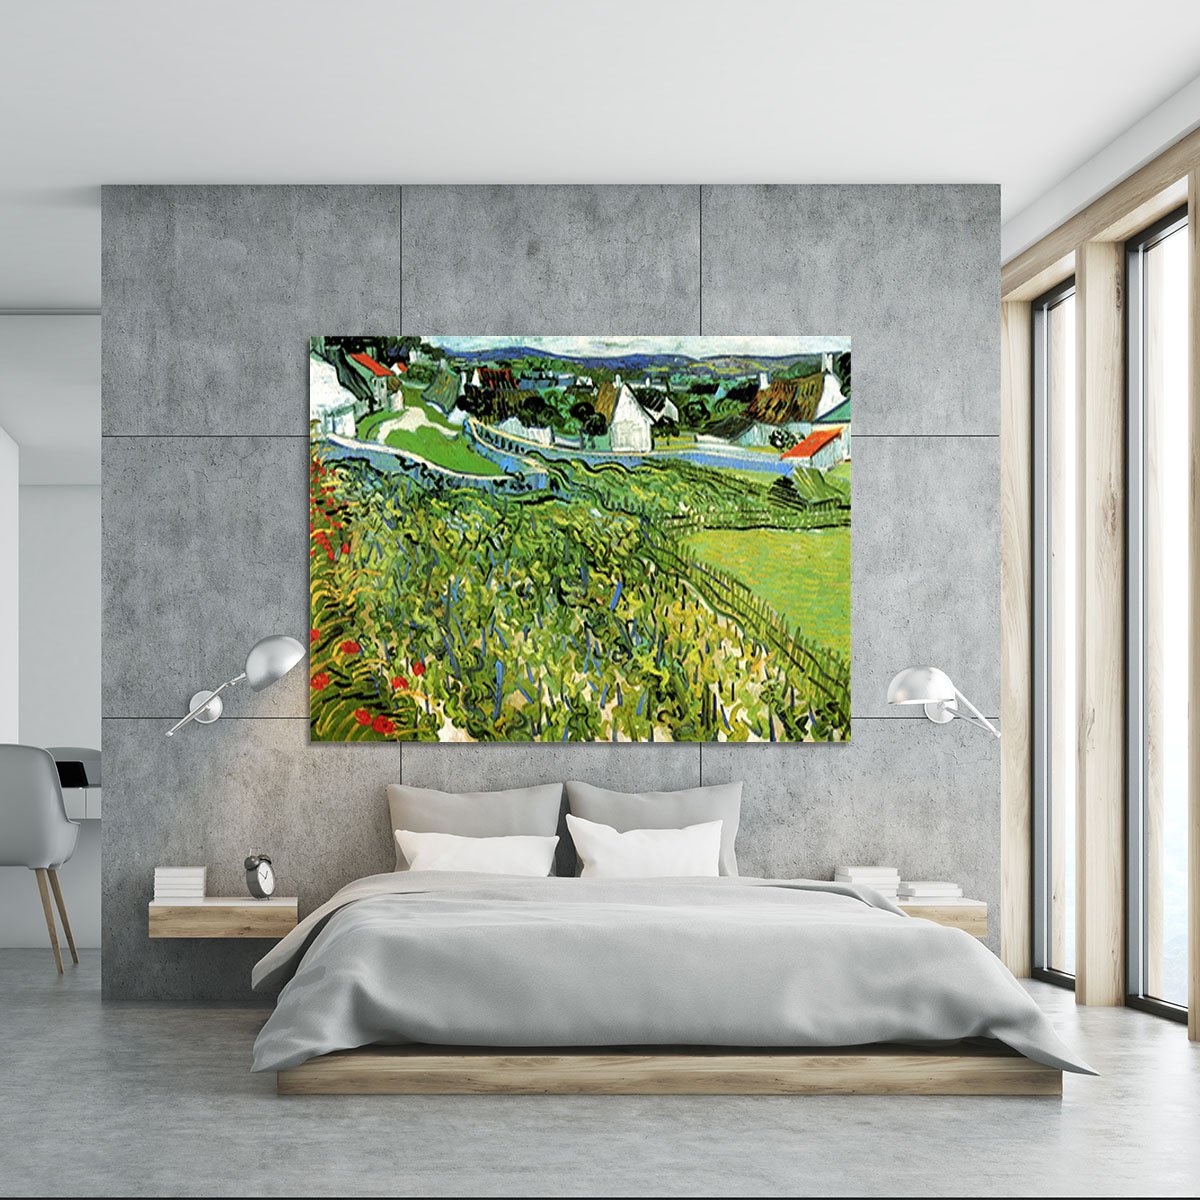 Vineyards with a View of Auvers by Van Gogh Canvas Print or Poster